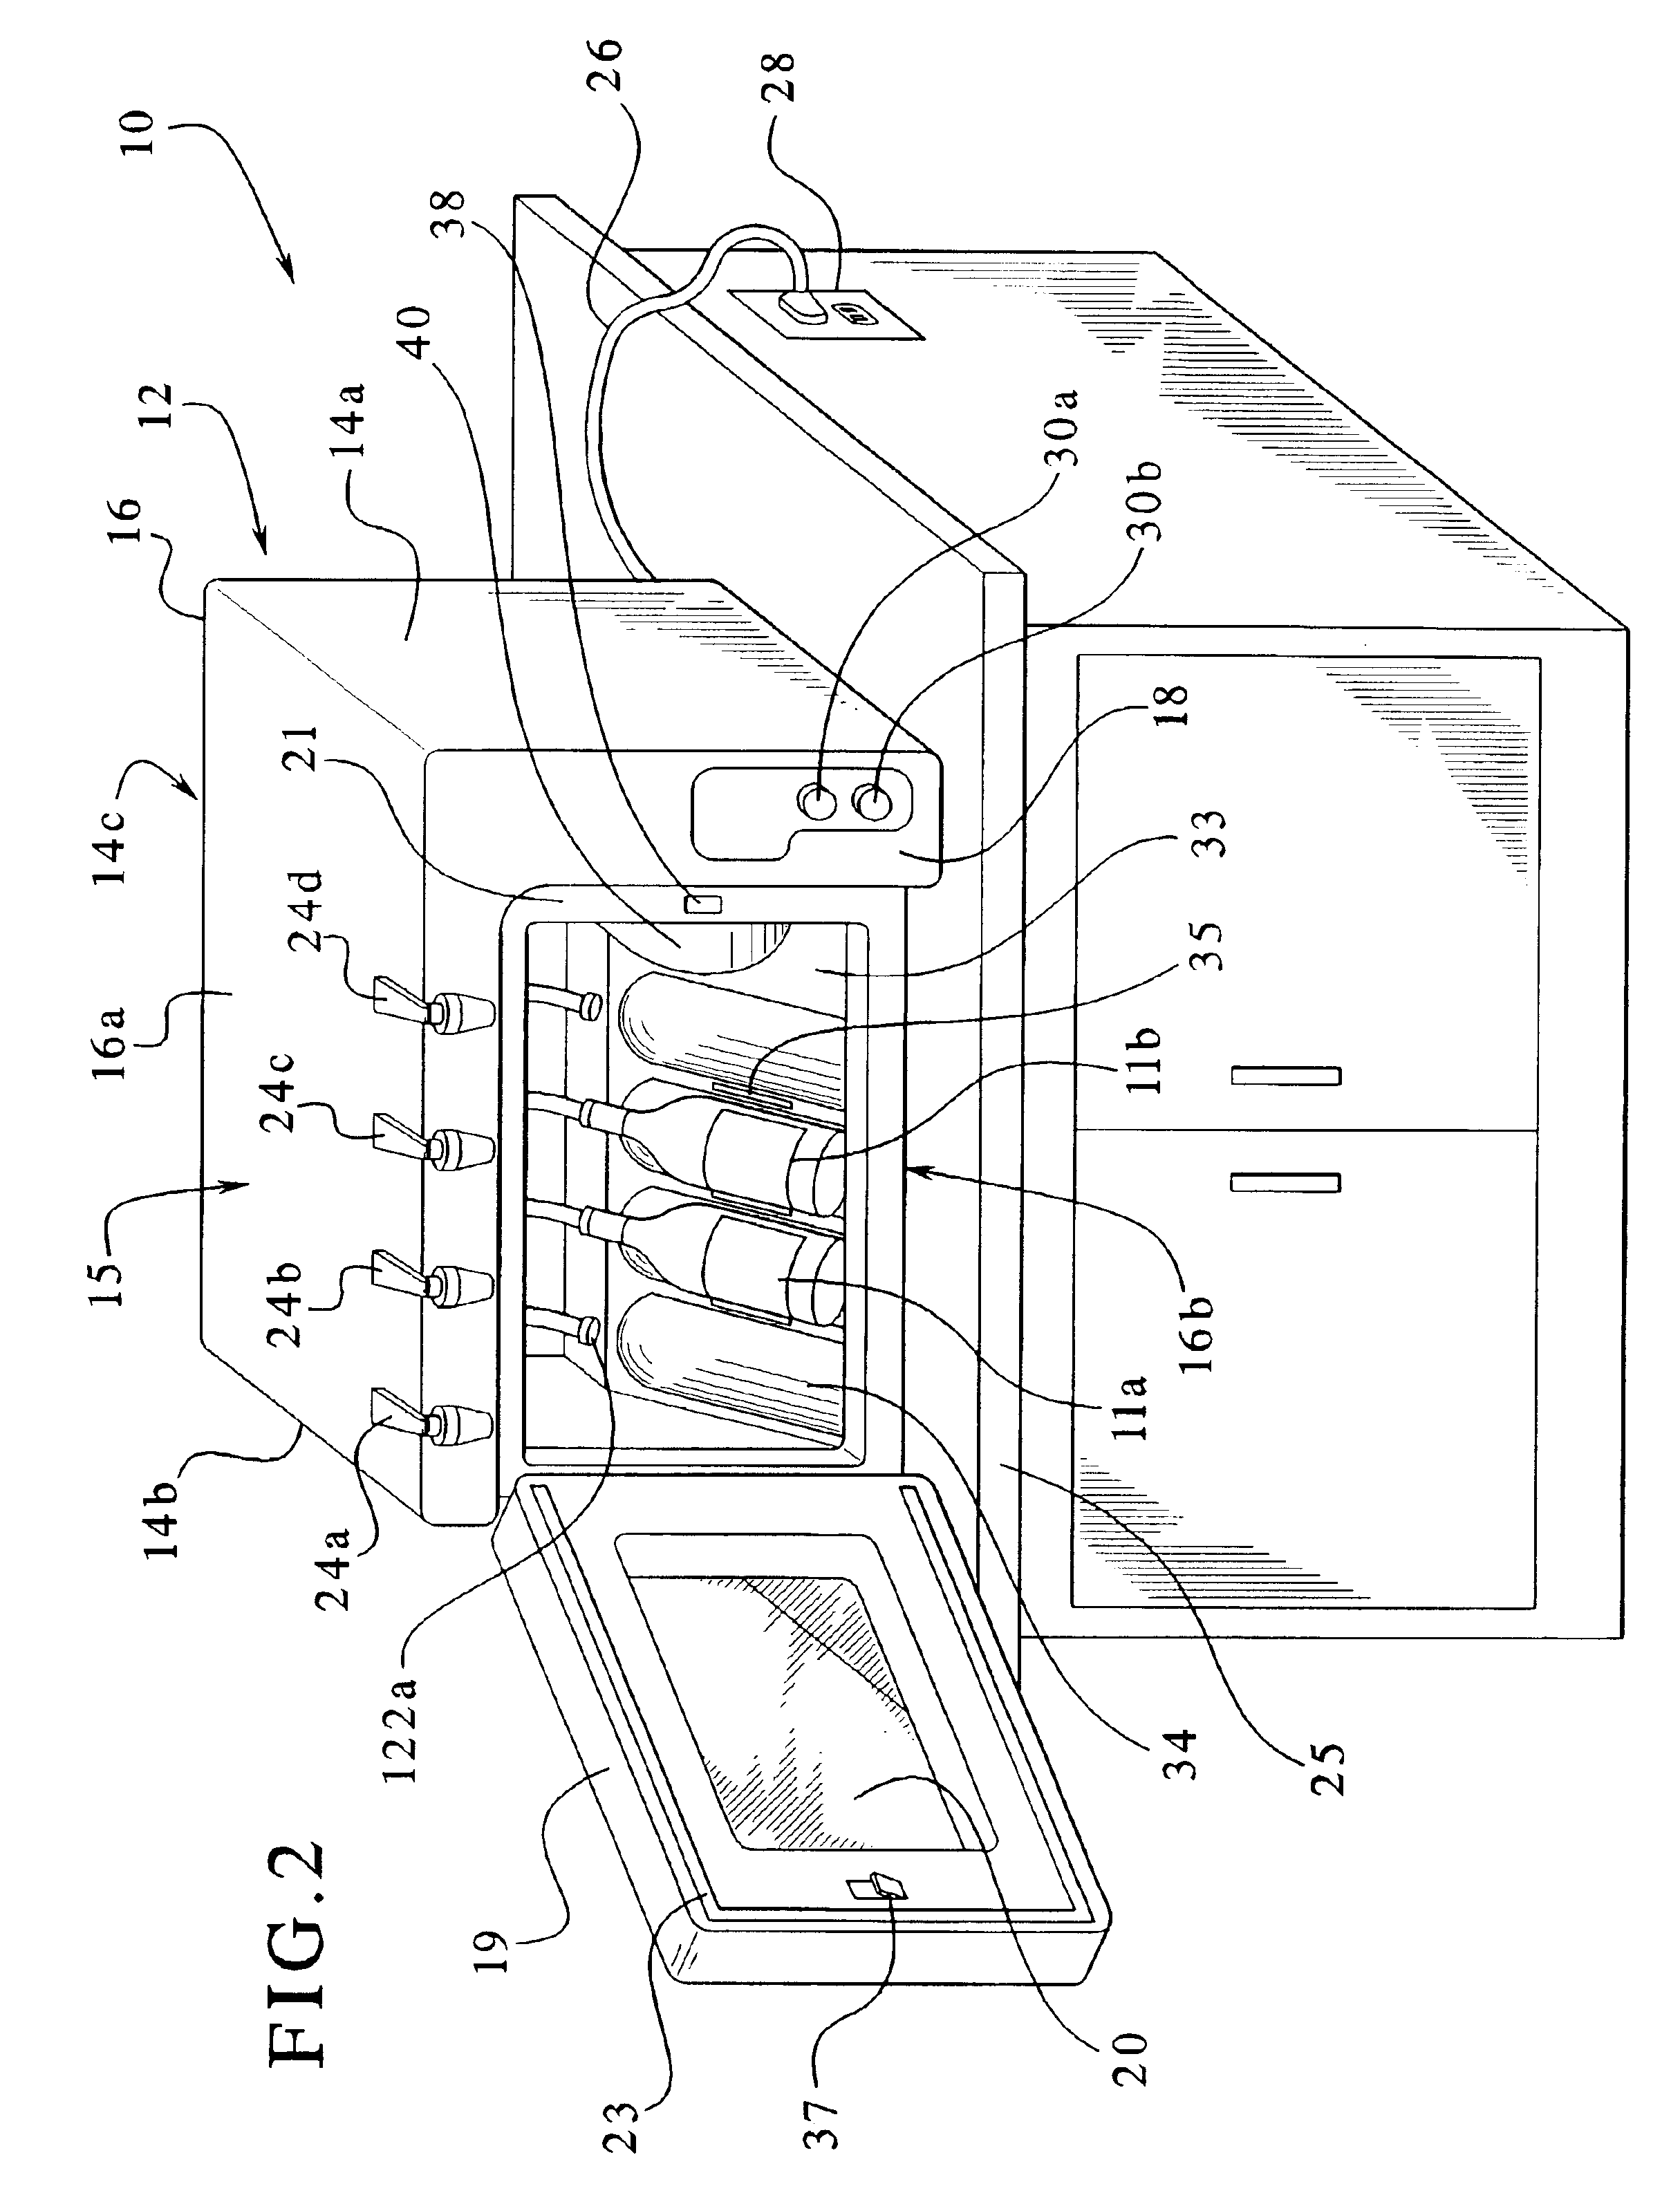 Wine or champagne preservation and dispensing apparatus